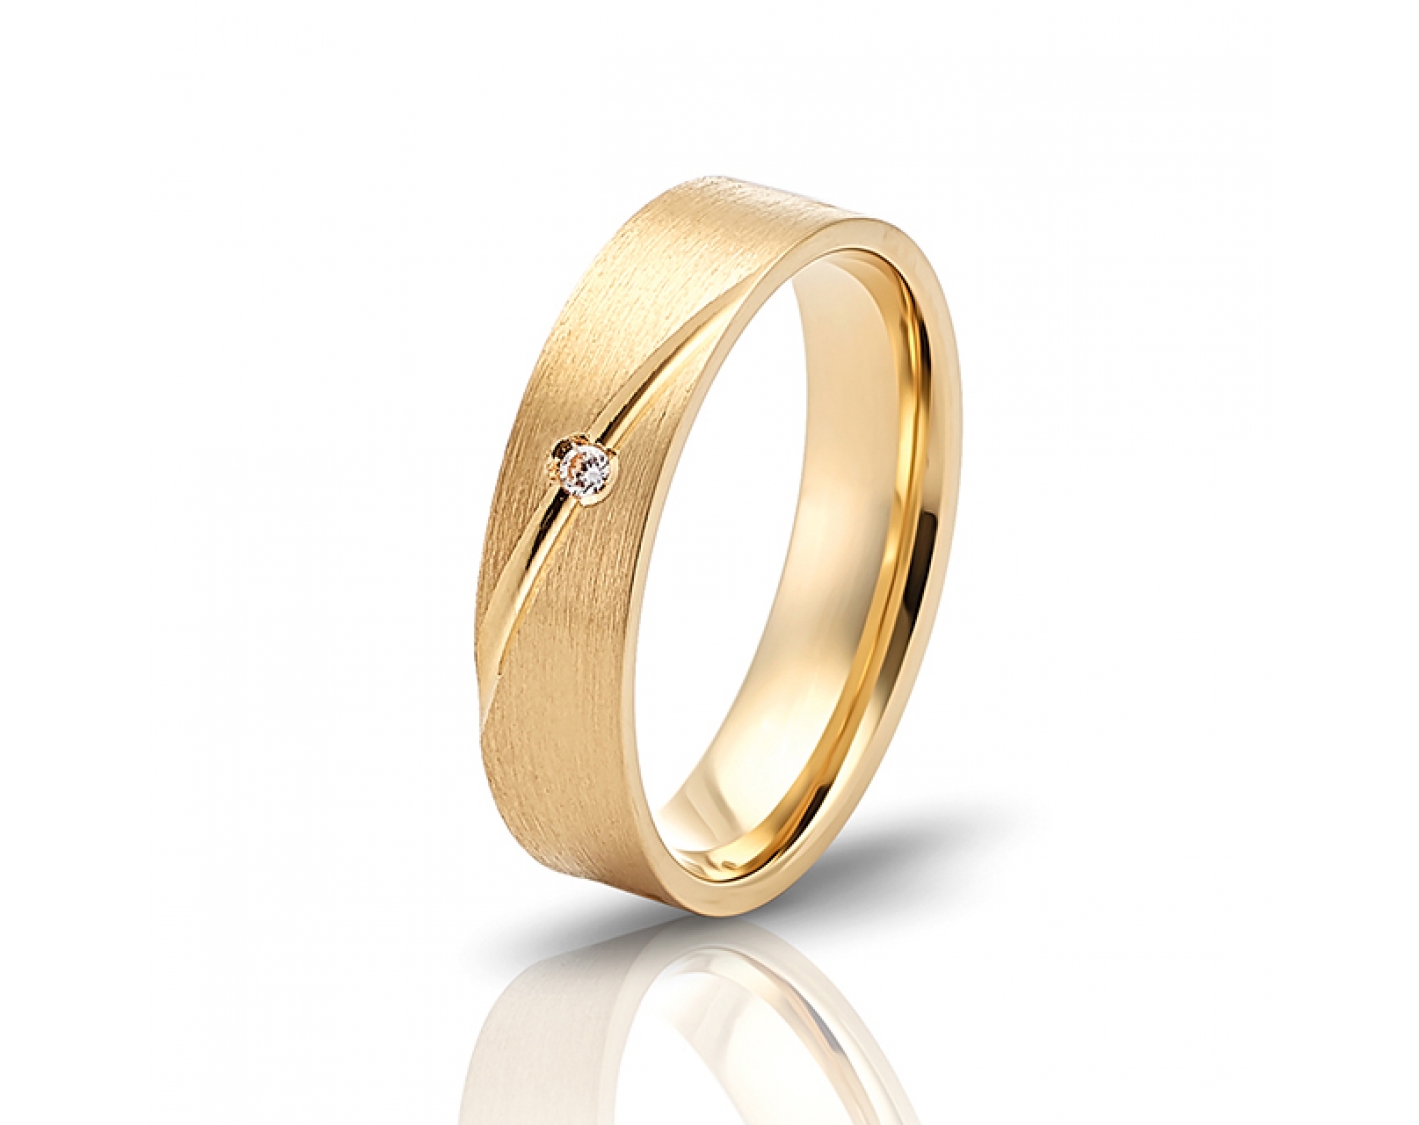 18k yellow gold 5mm matte wedding band with diagonal line and a diamond